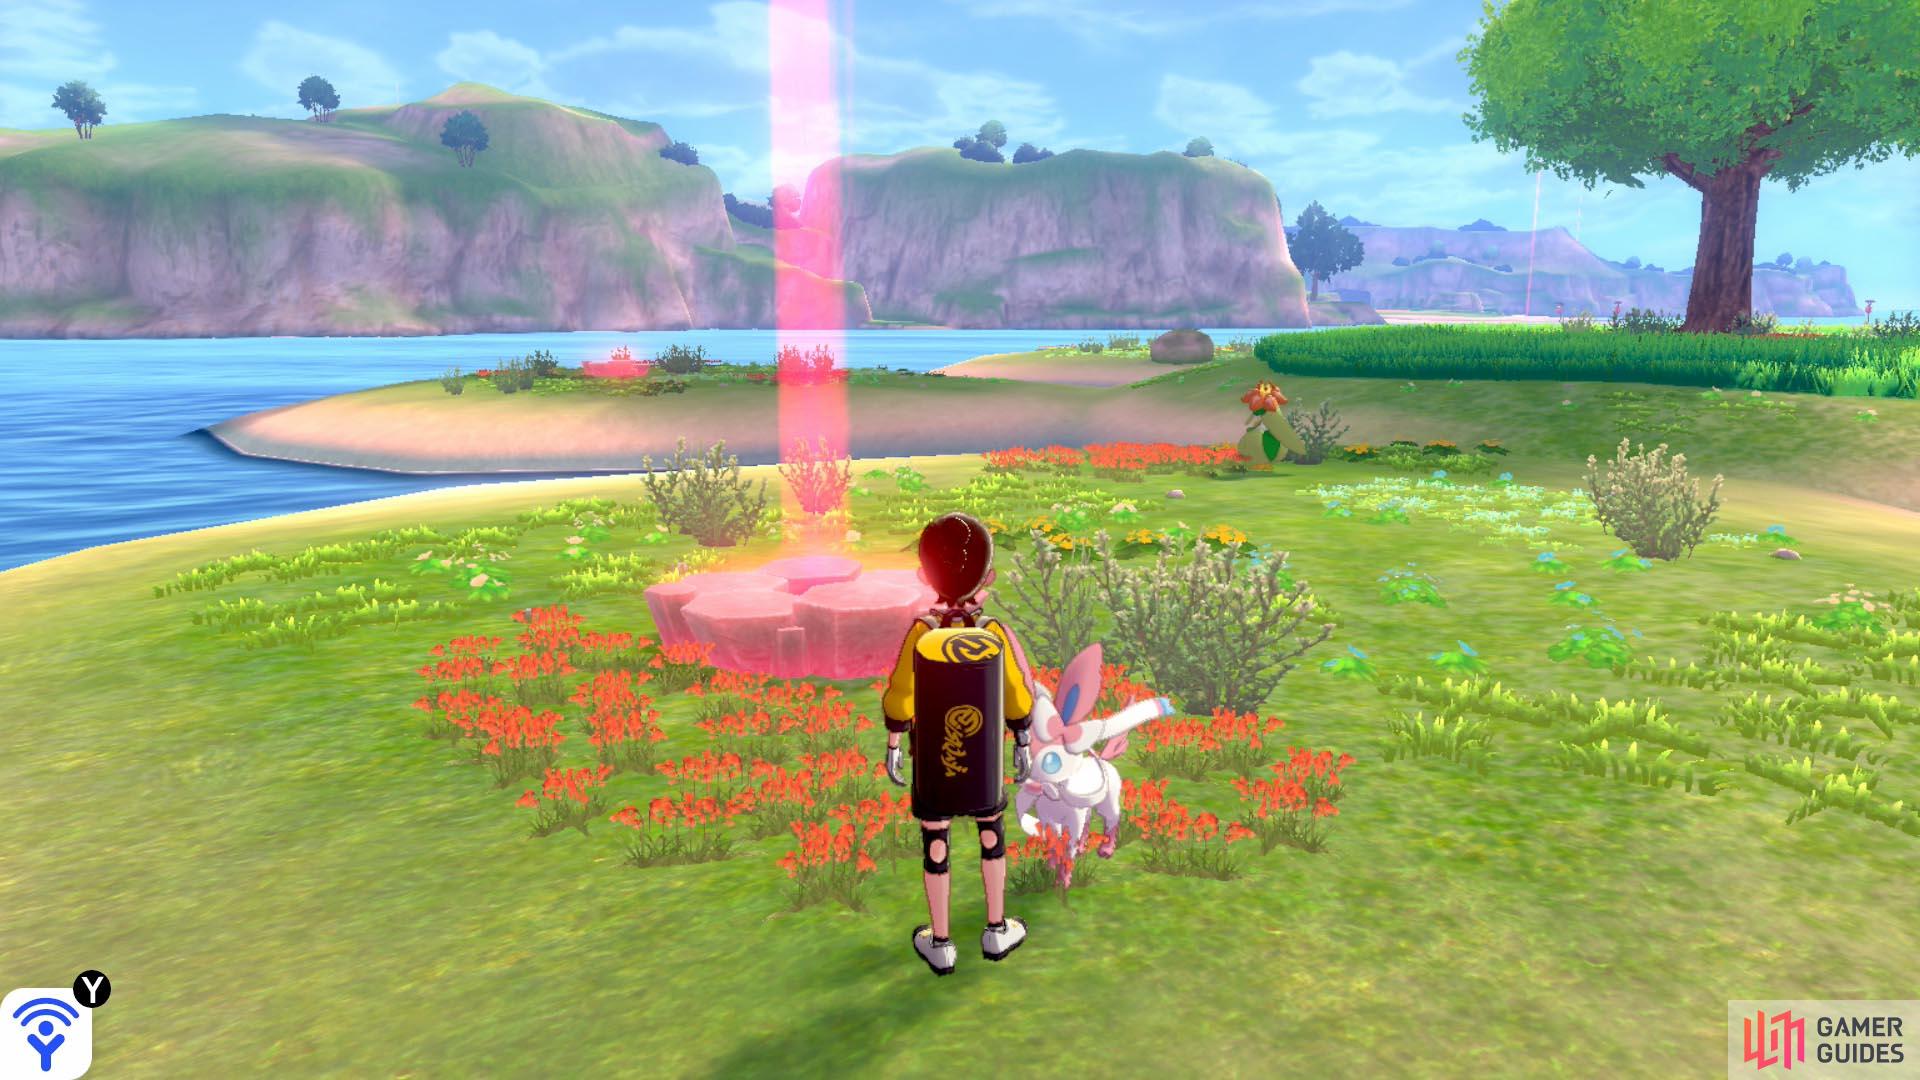 There are six dens, each located on one of the “petals” of the island. All dens feature the same list of Pokémon.